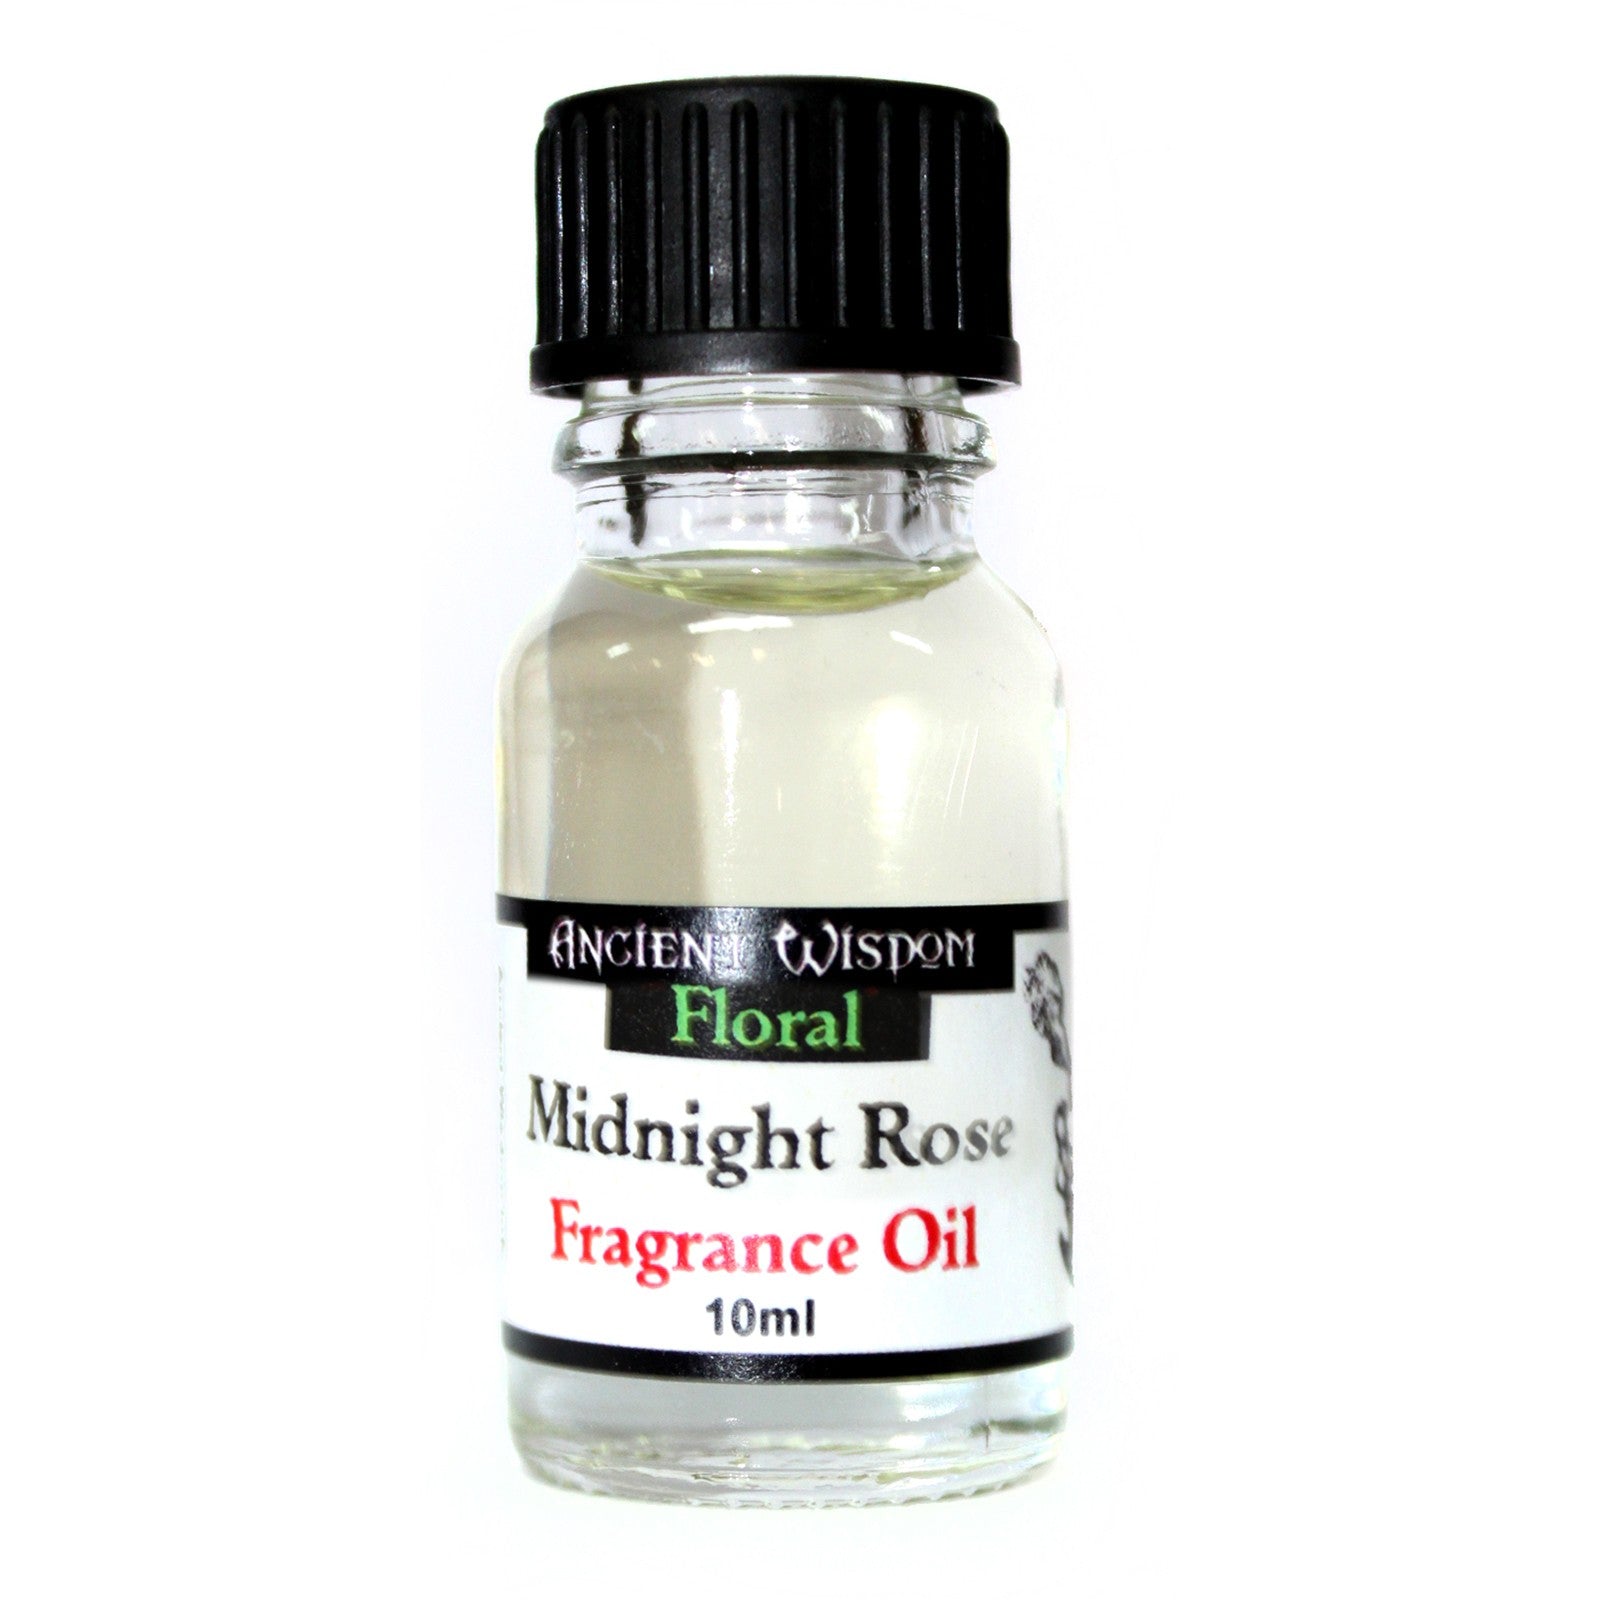 View 10ml Midnight Rose Fragrance Oil information